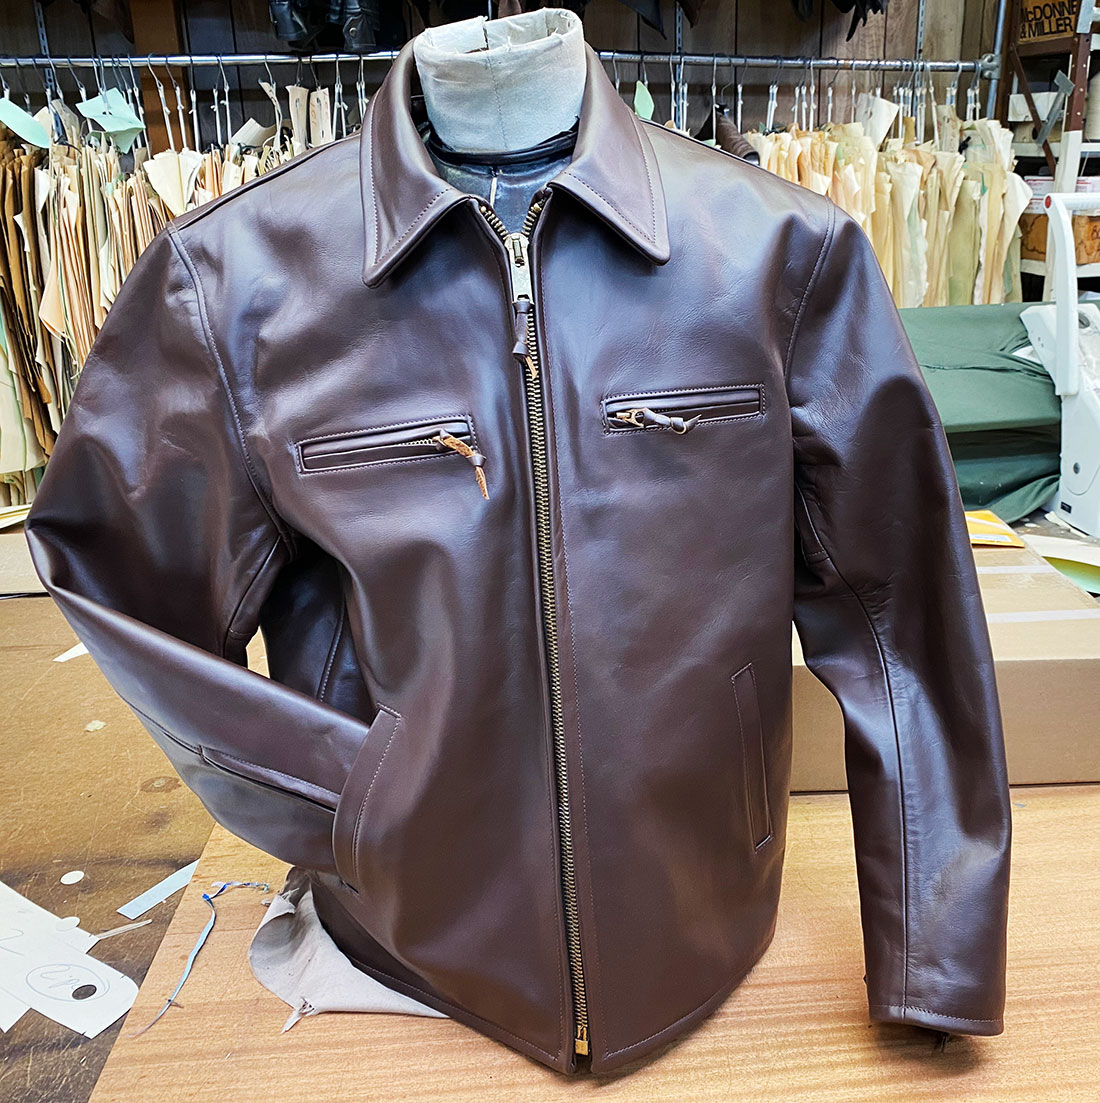 Suburban Russet Horsehide Leather Motorcycle Jacket, 1940s, Lost Worlds